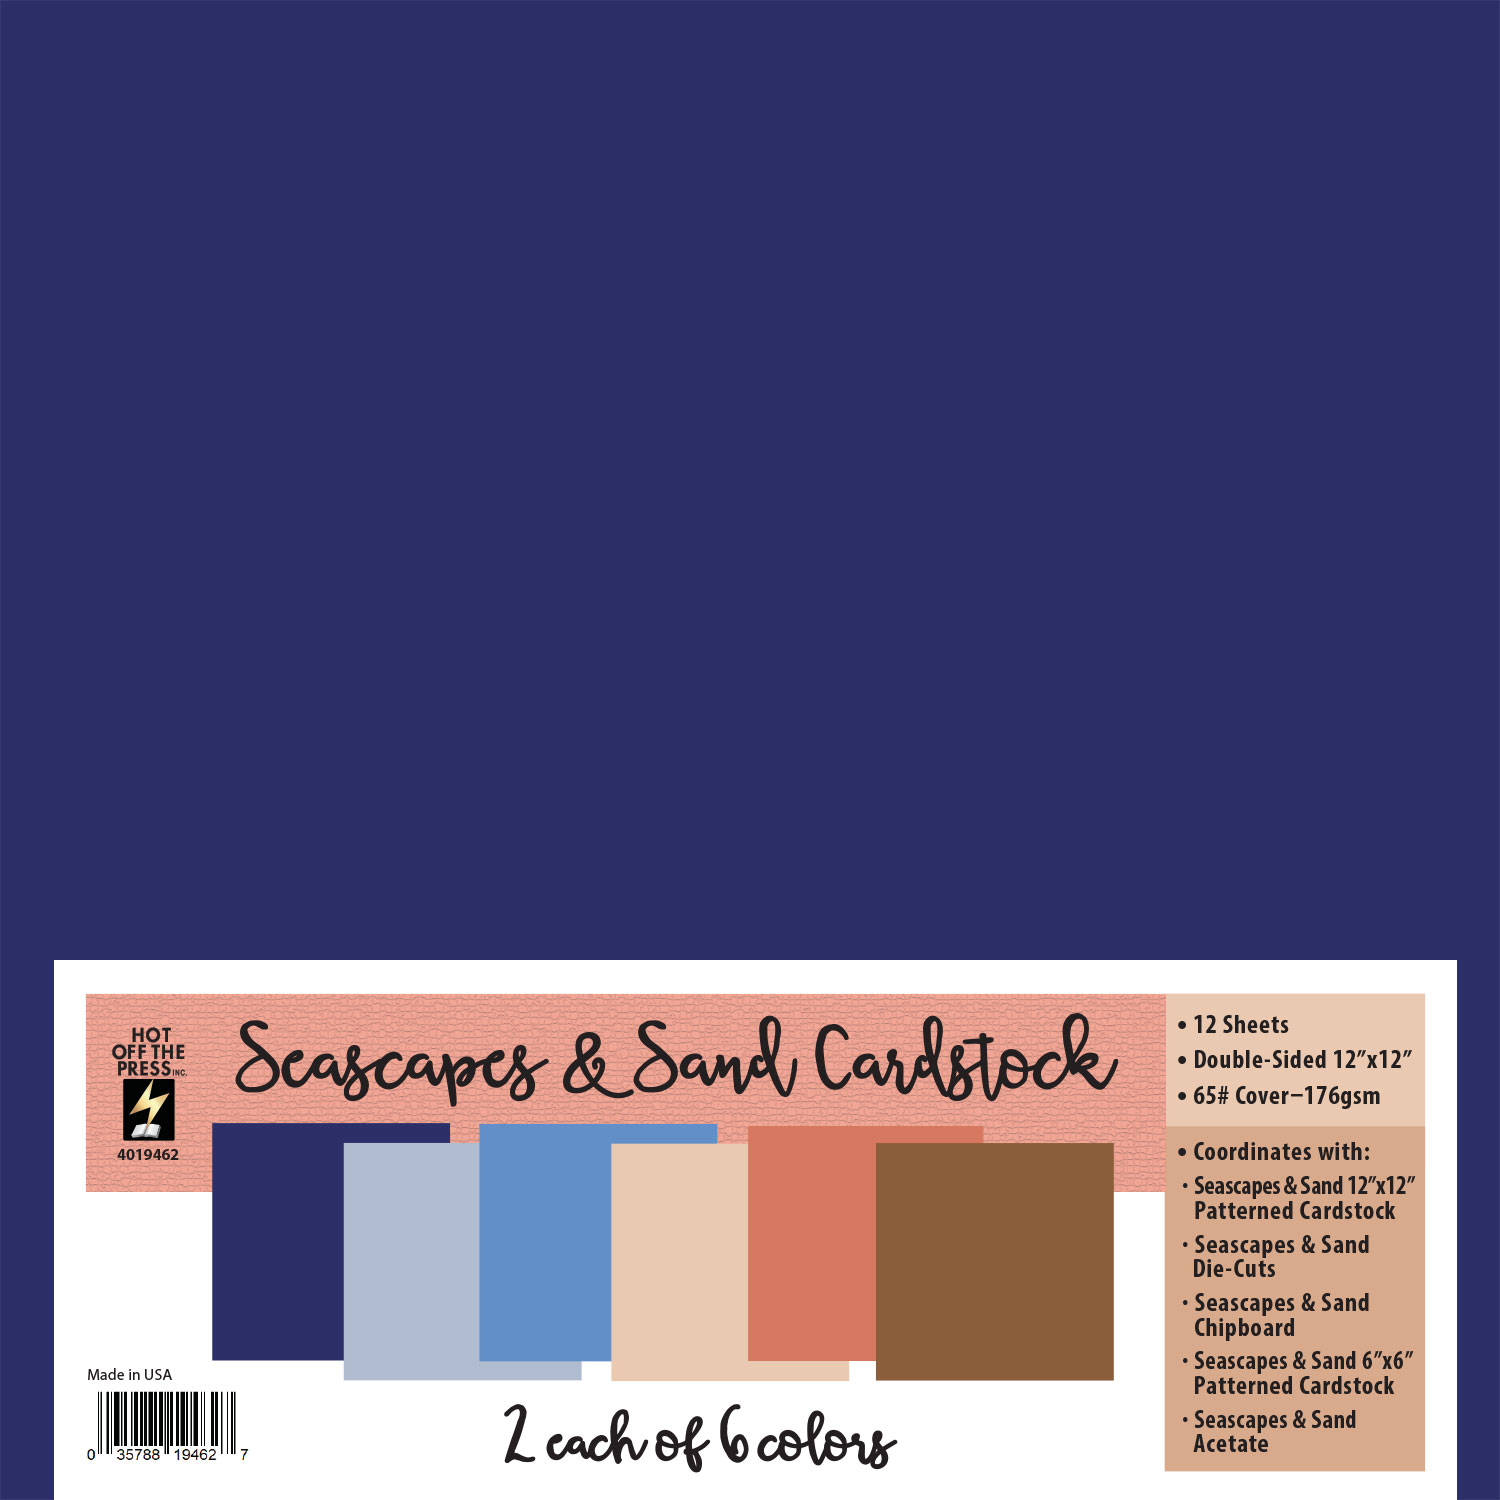 Seascapes & Sand 12x12 Solid Cardstock